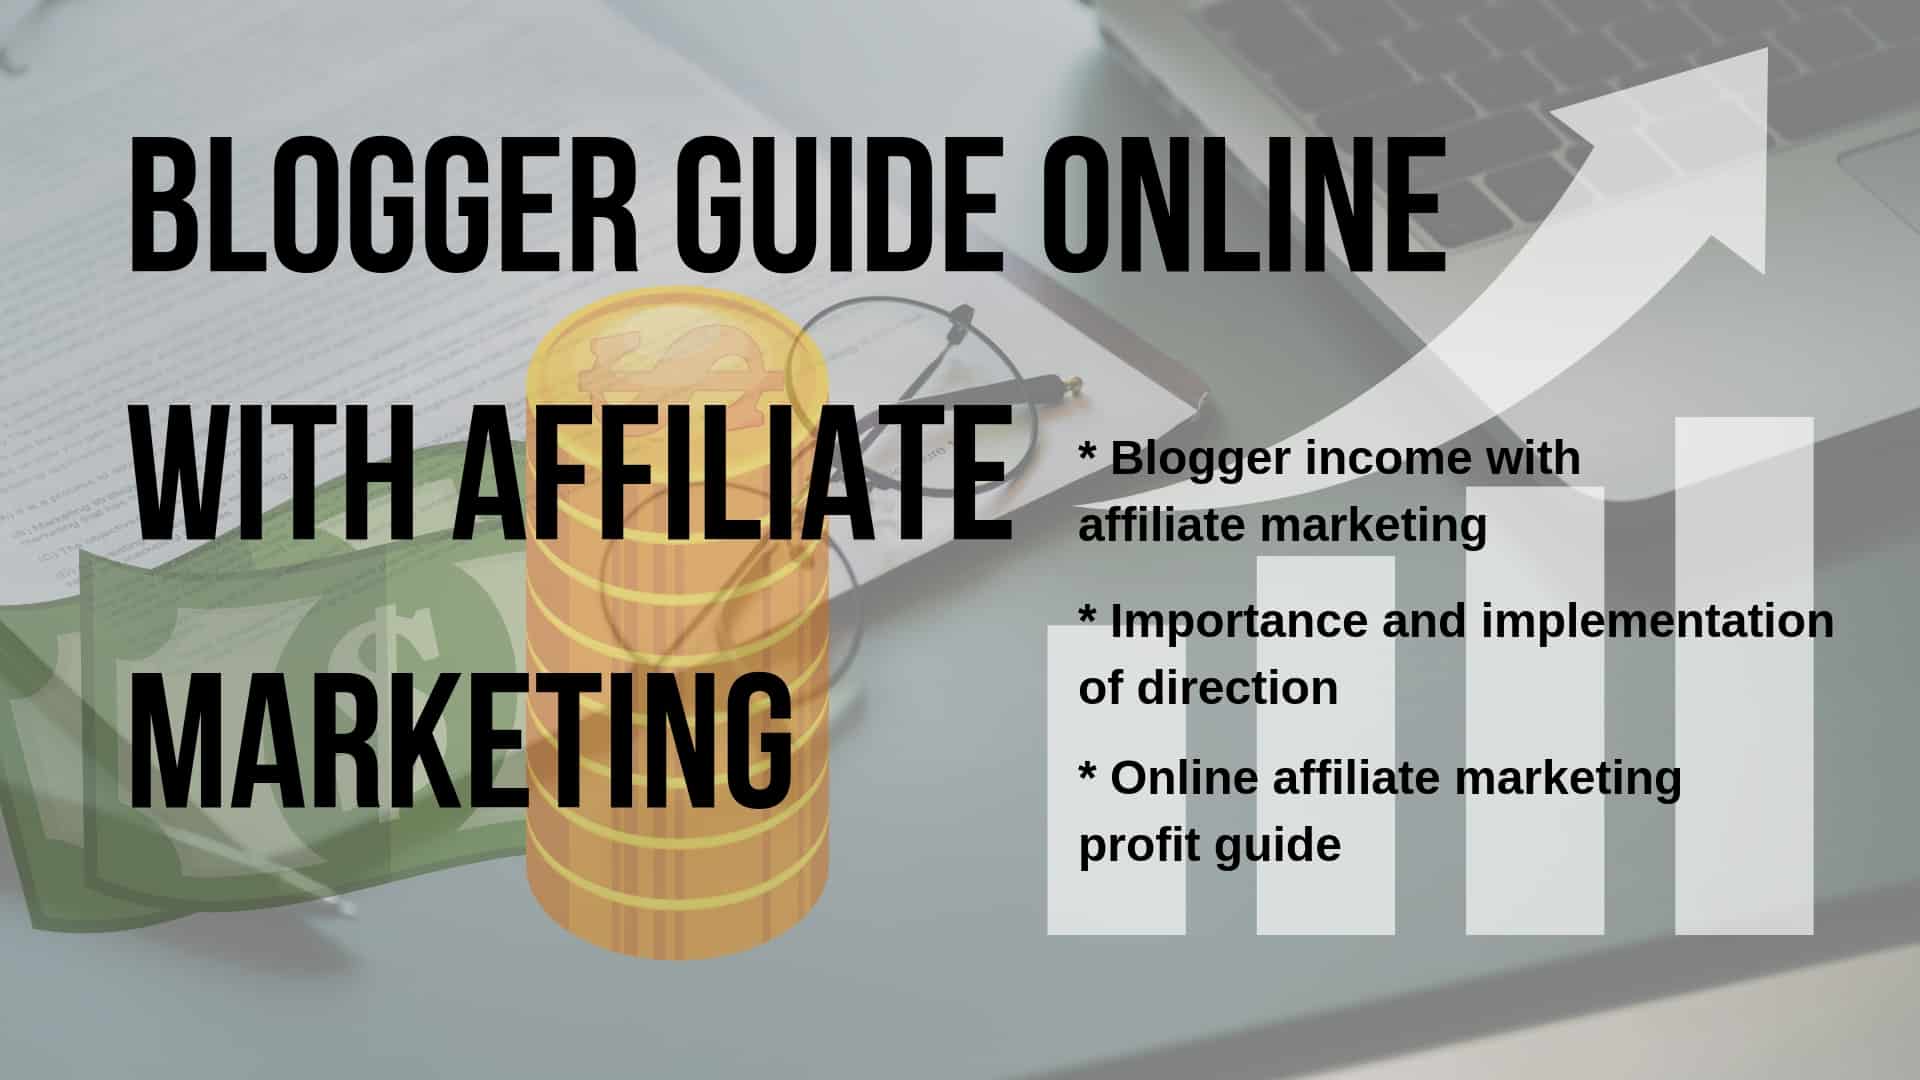 Blogger guide online with affiliate marketing